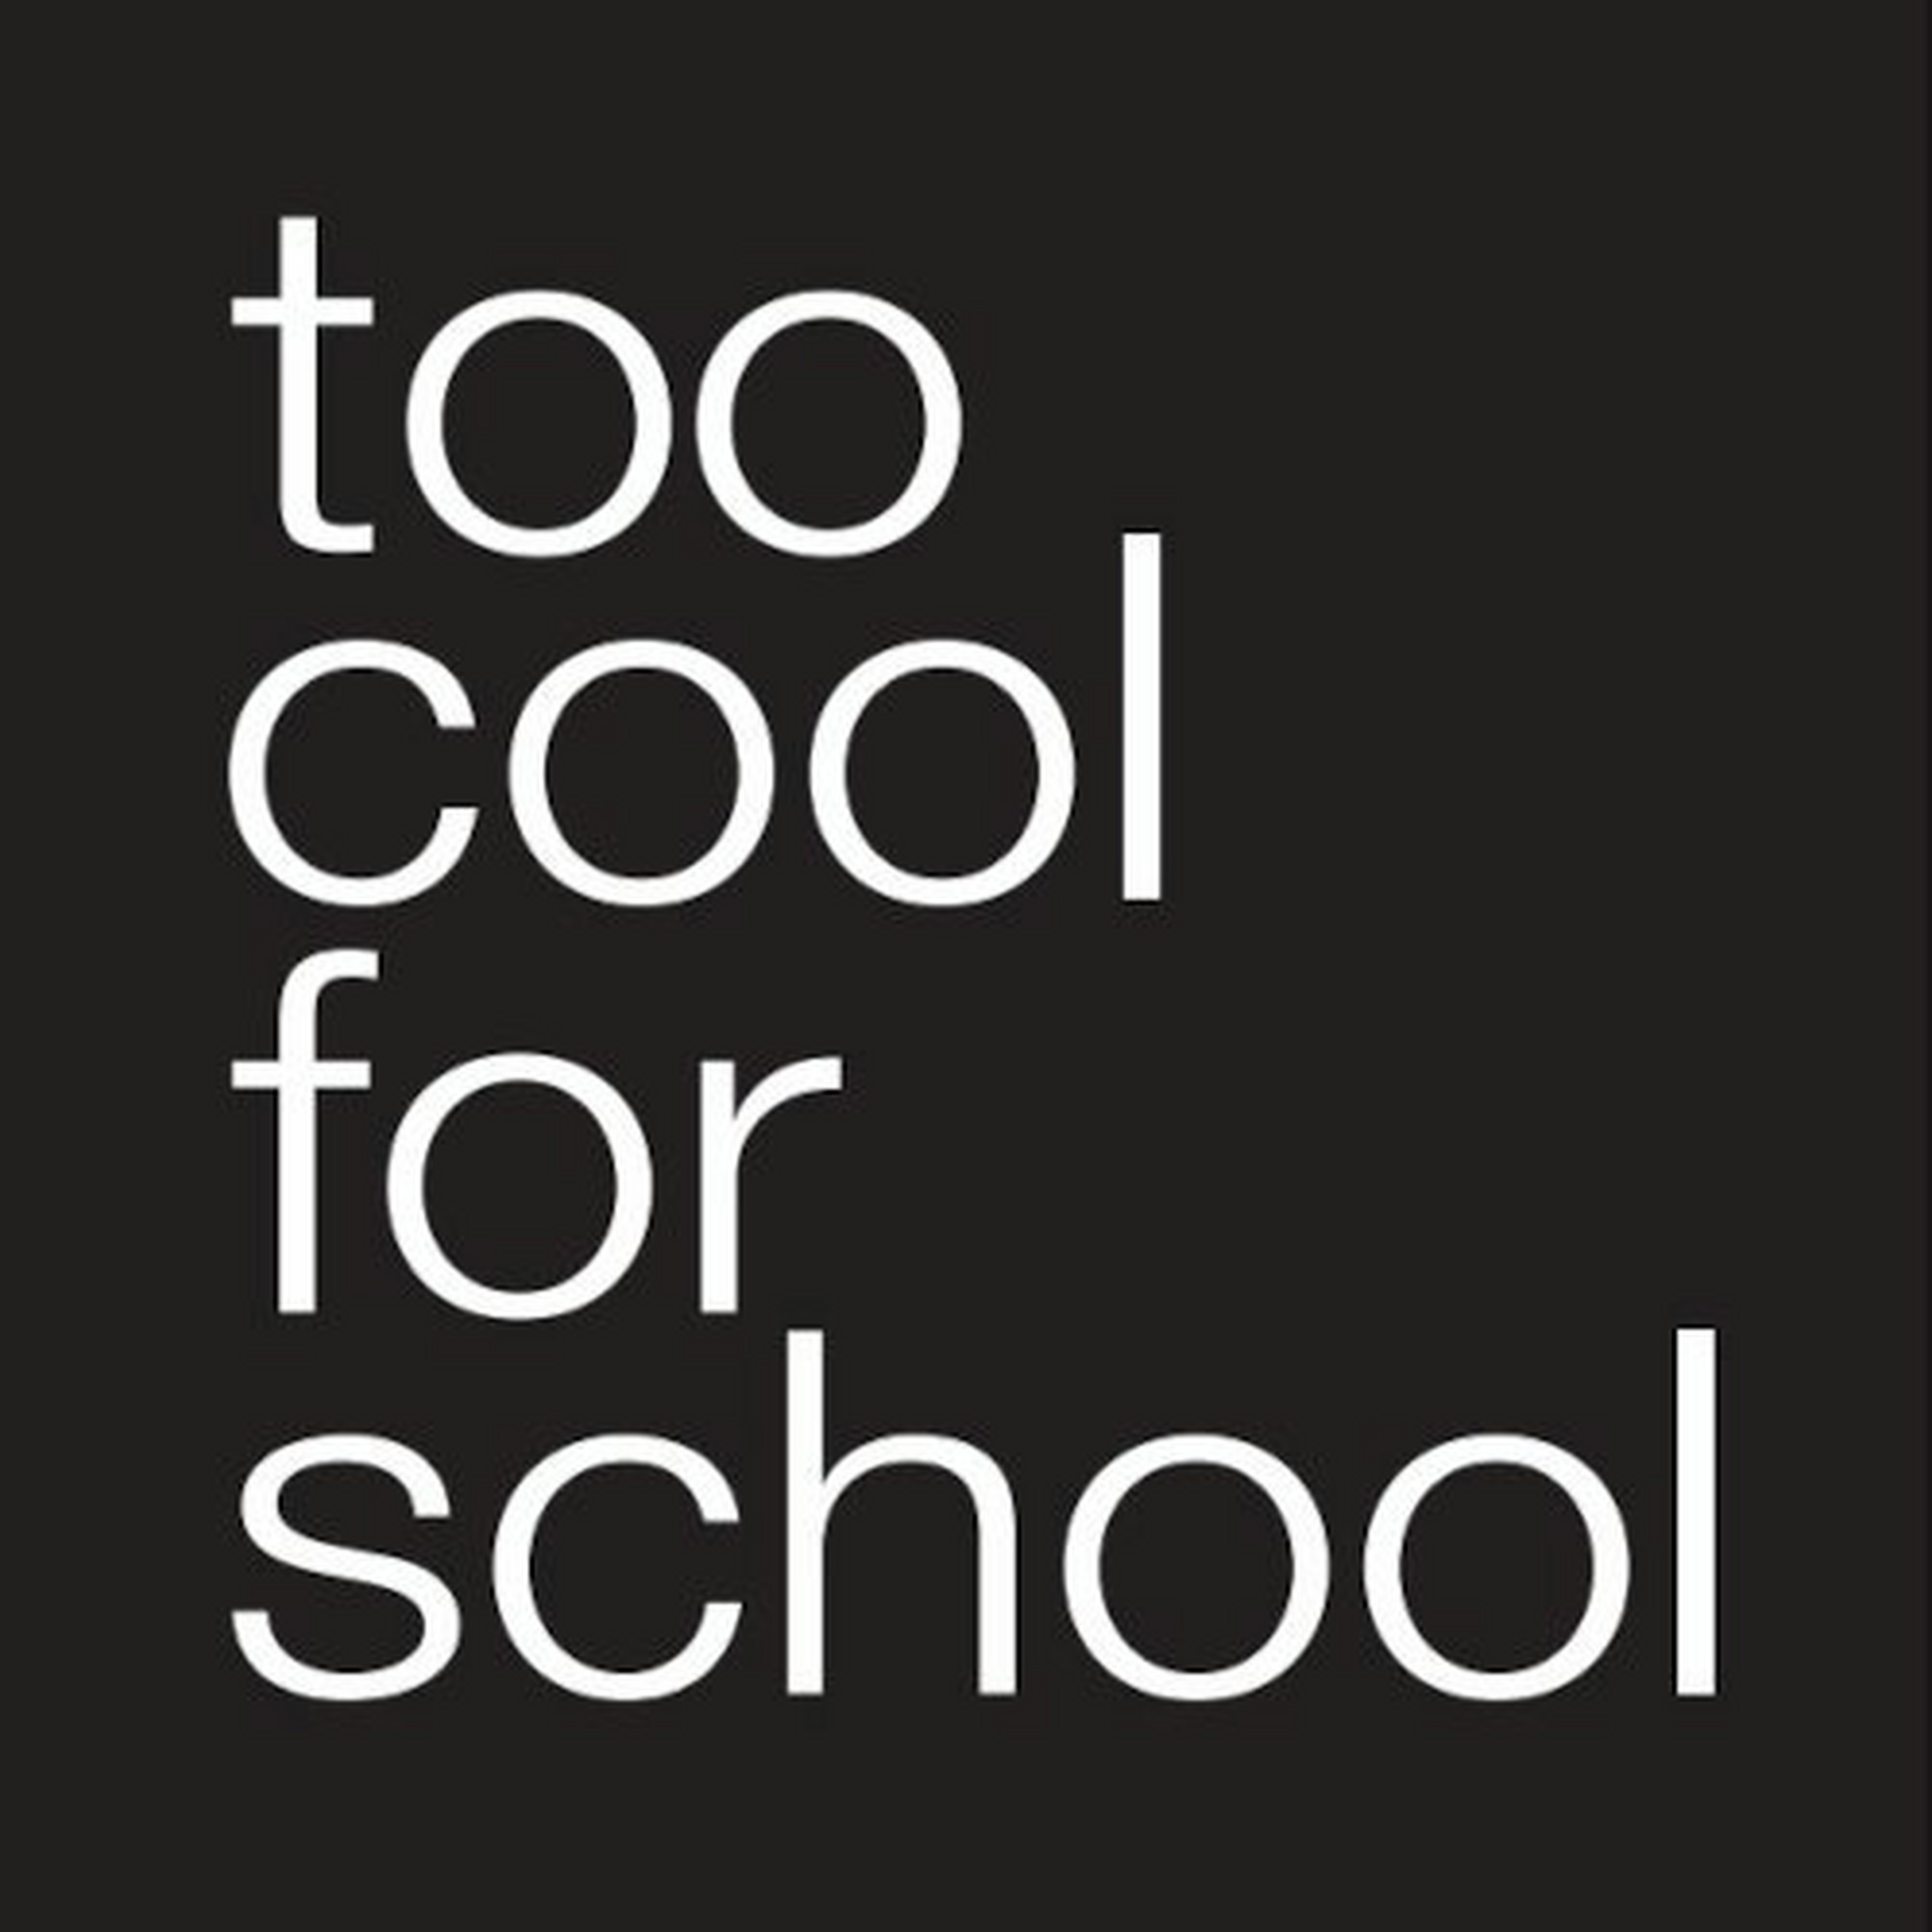 Too Cool For School logotype